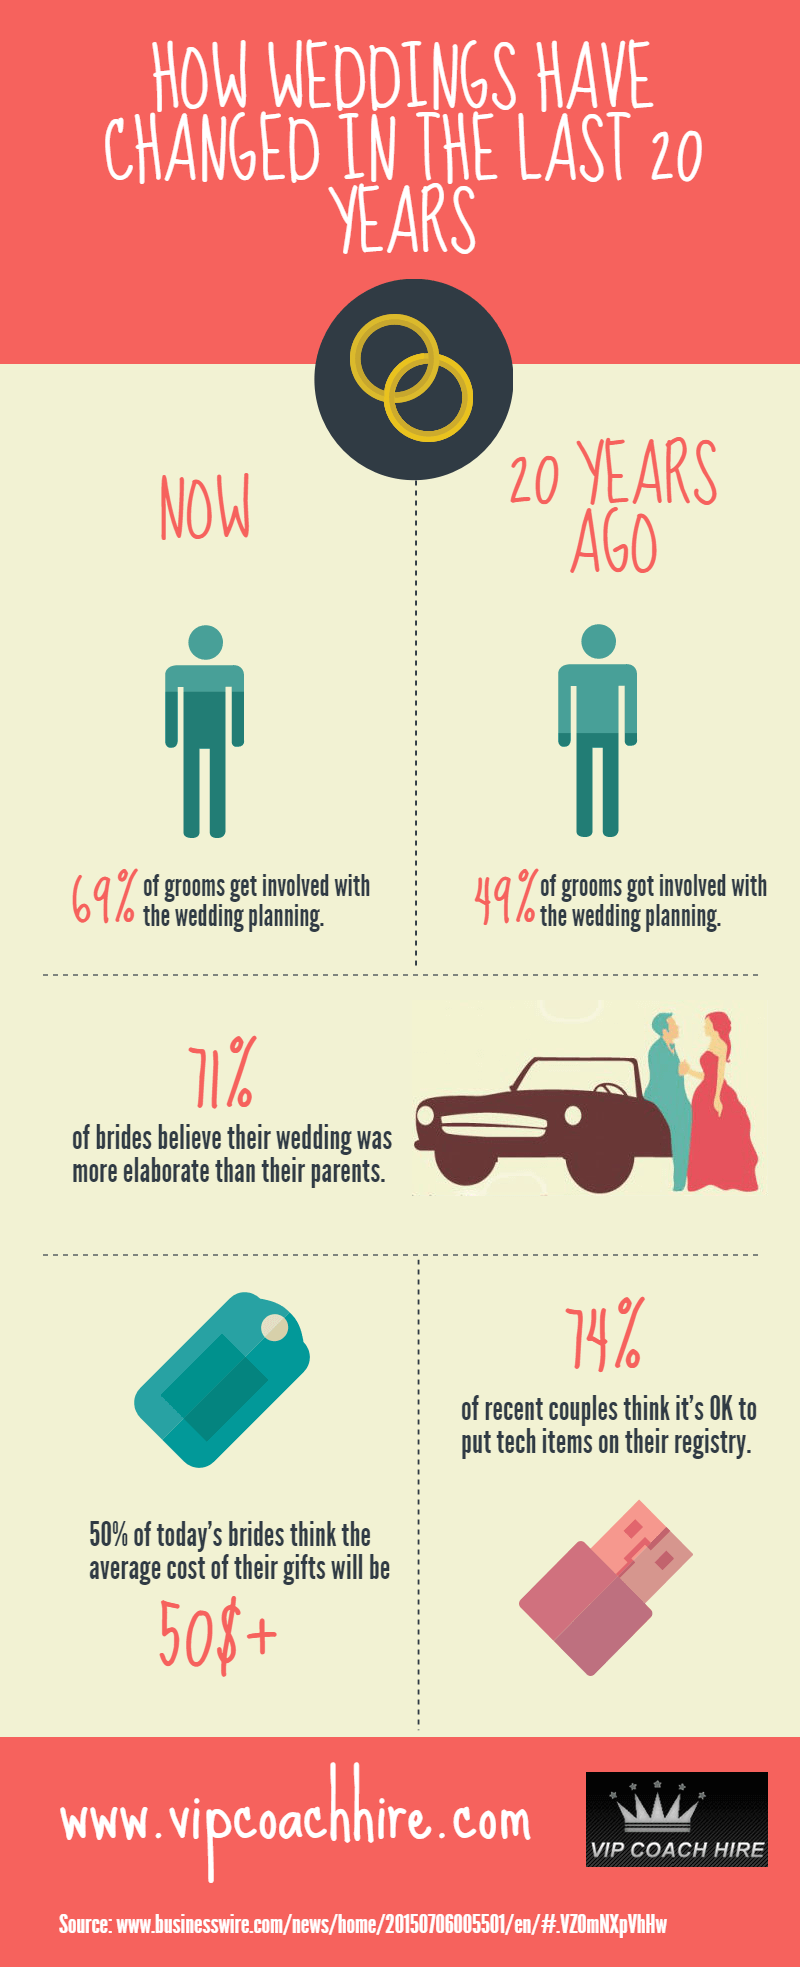 How Weddings Have Changed in the Last 20 Years